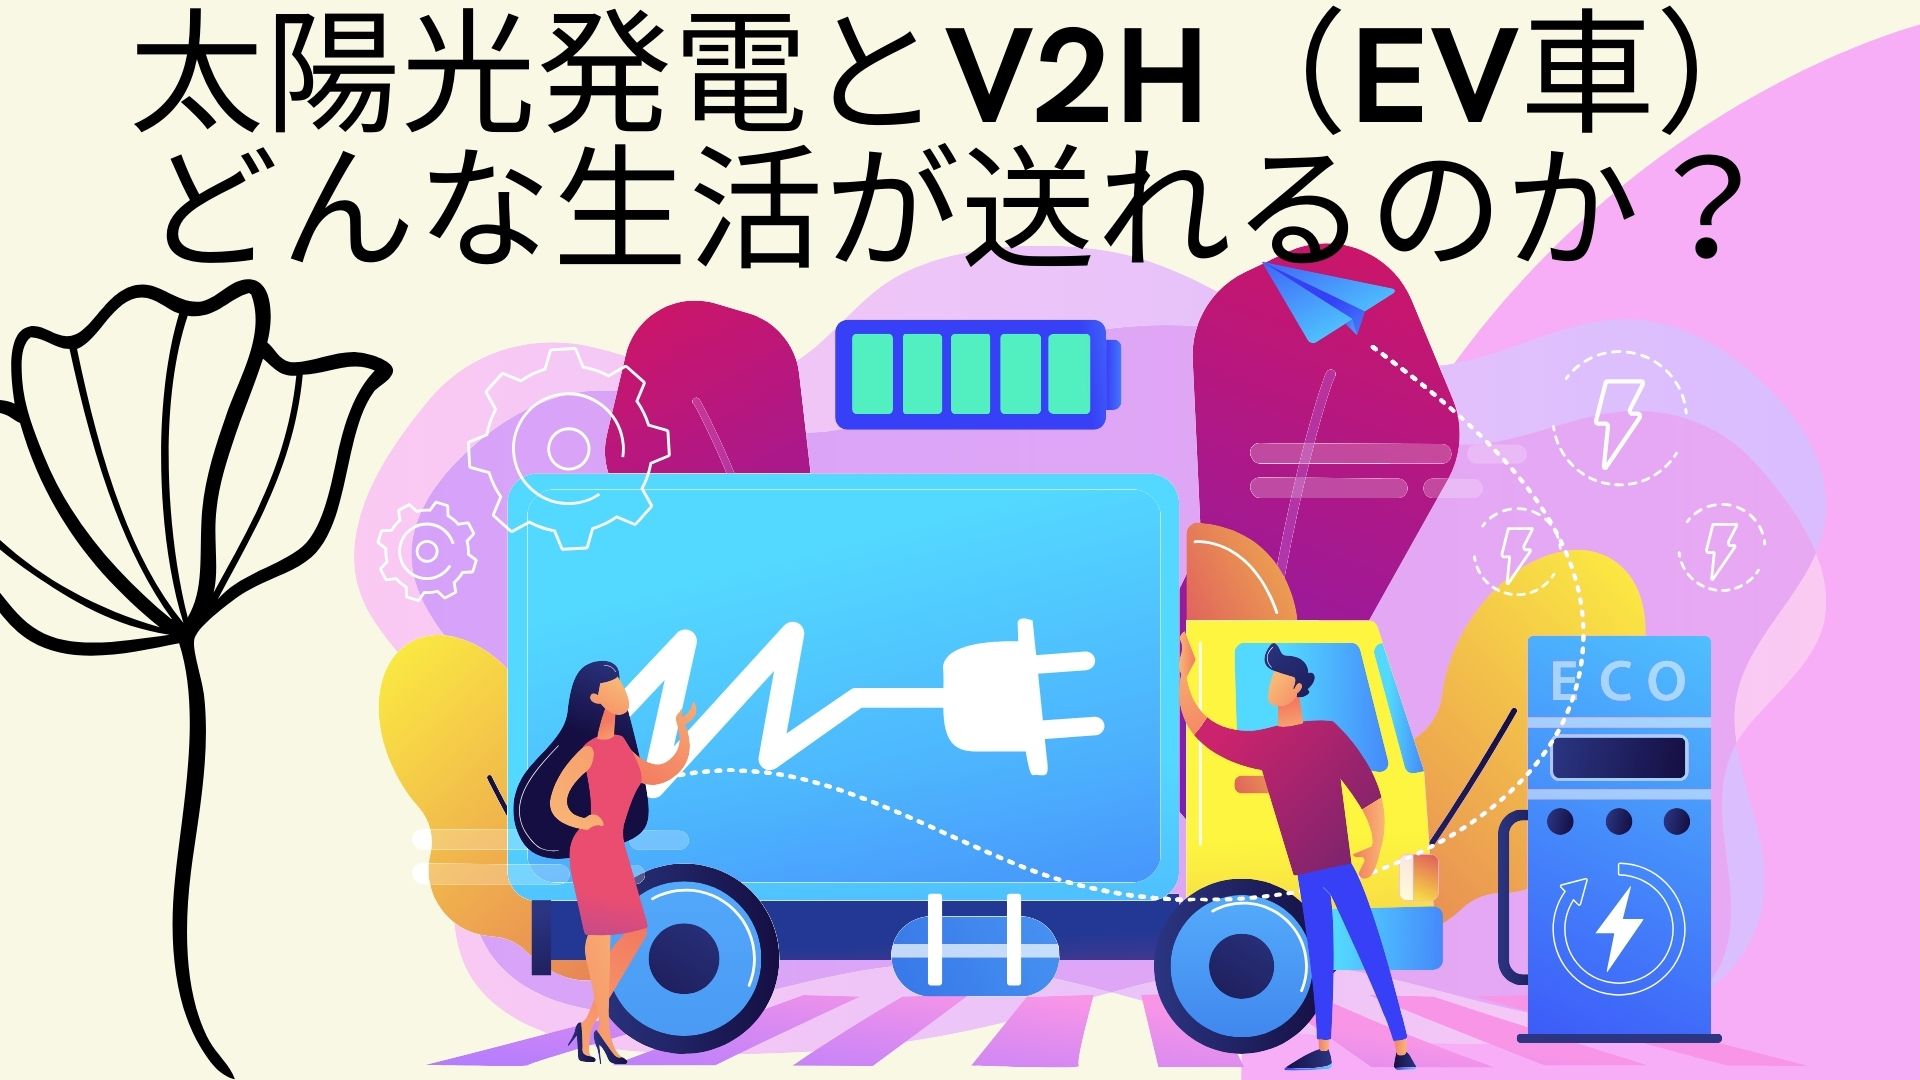 life-with-photovoltaic-power-generation-and-V2H-and-electric-car-in-chubu-electric-power-area